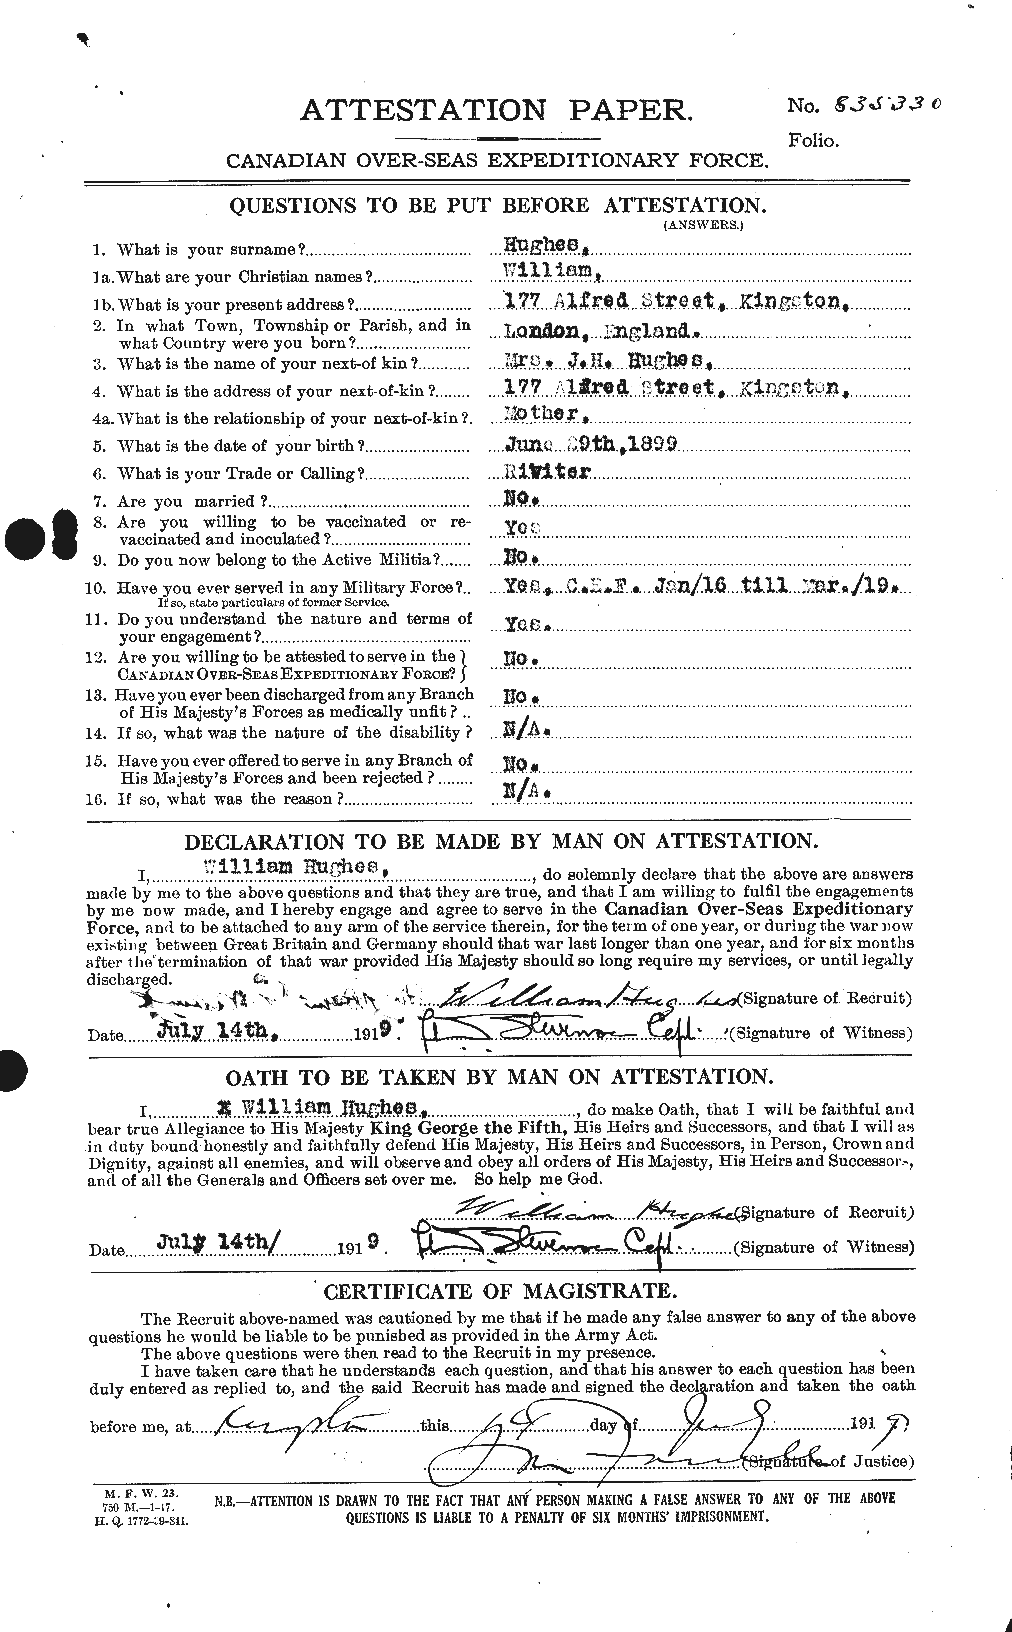 Personnel Records of the First World War - CEF 405905a